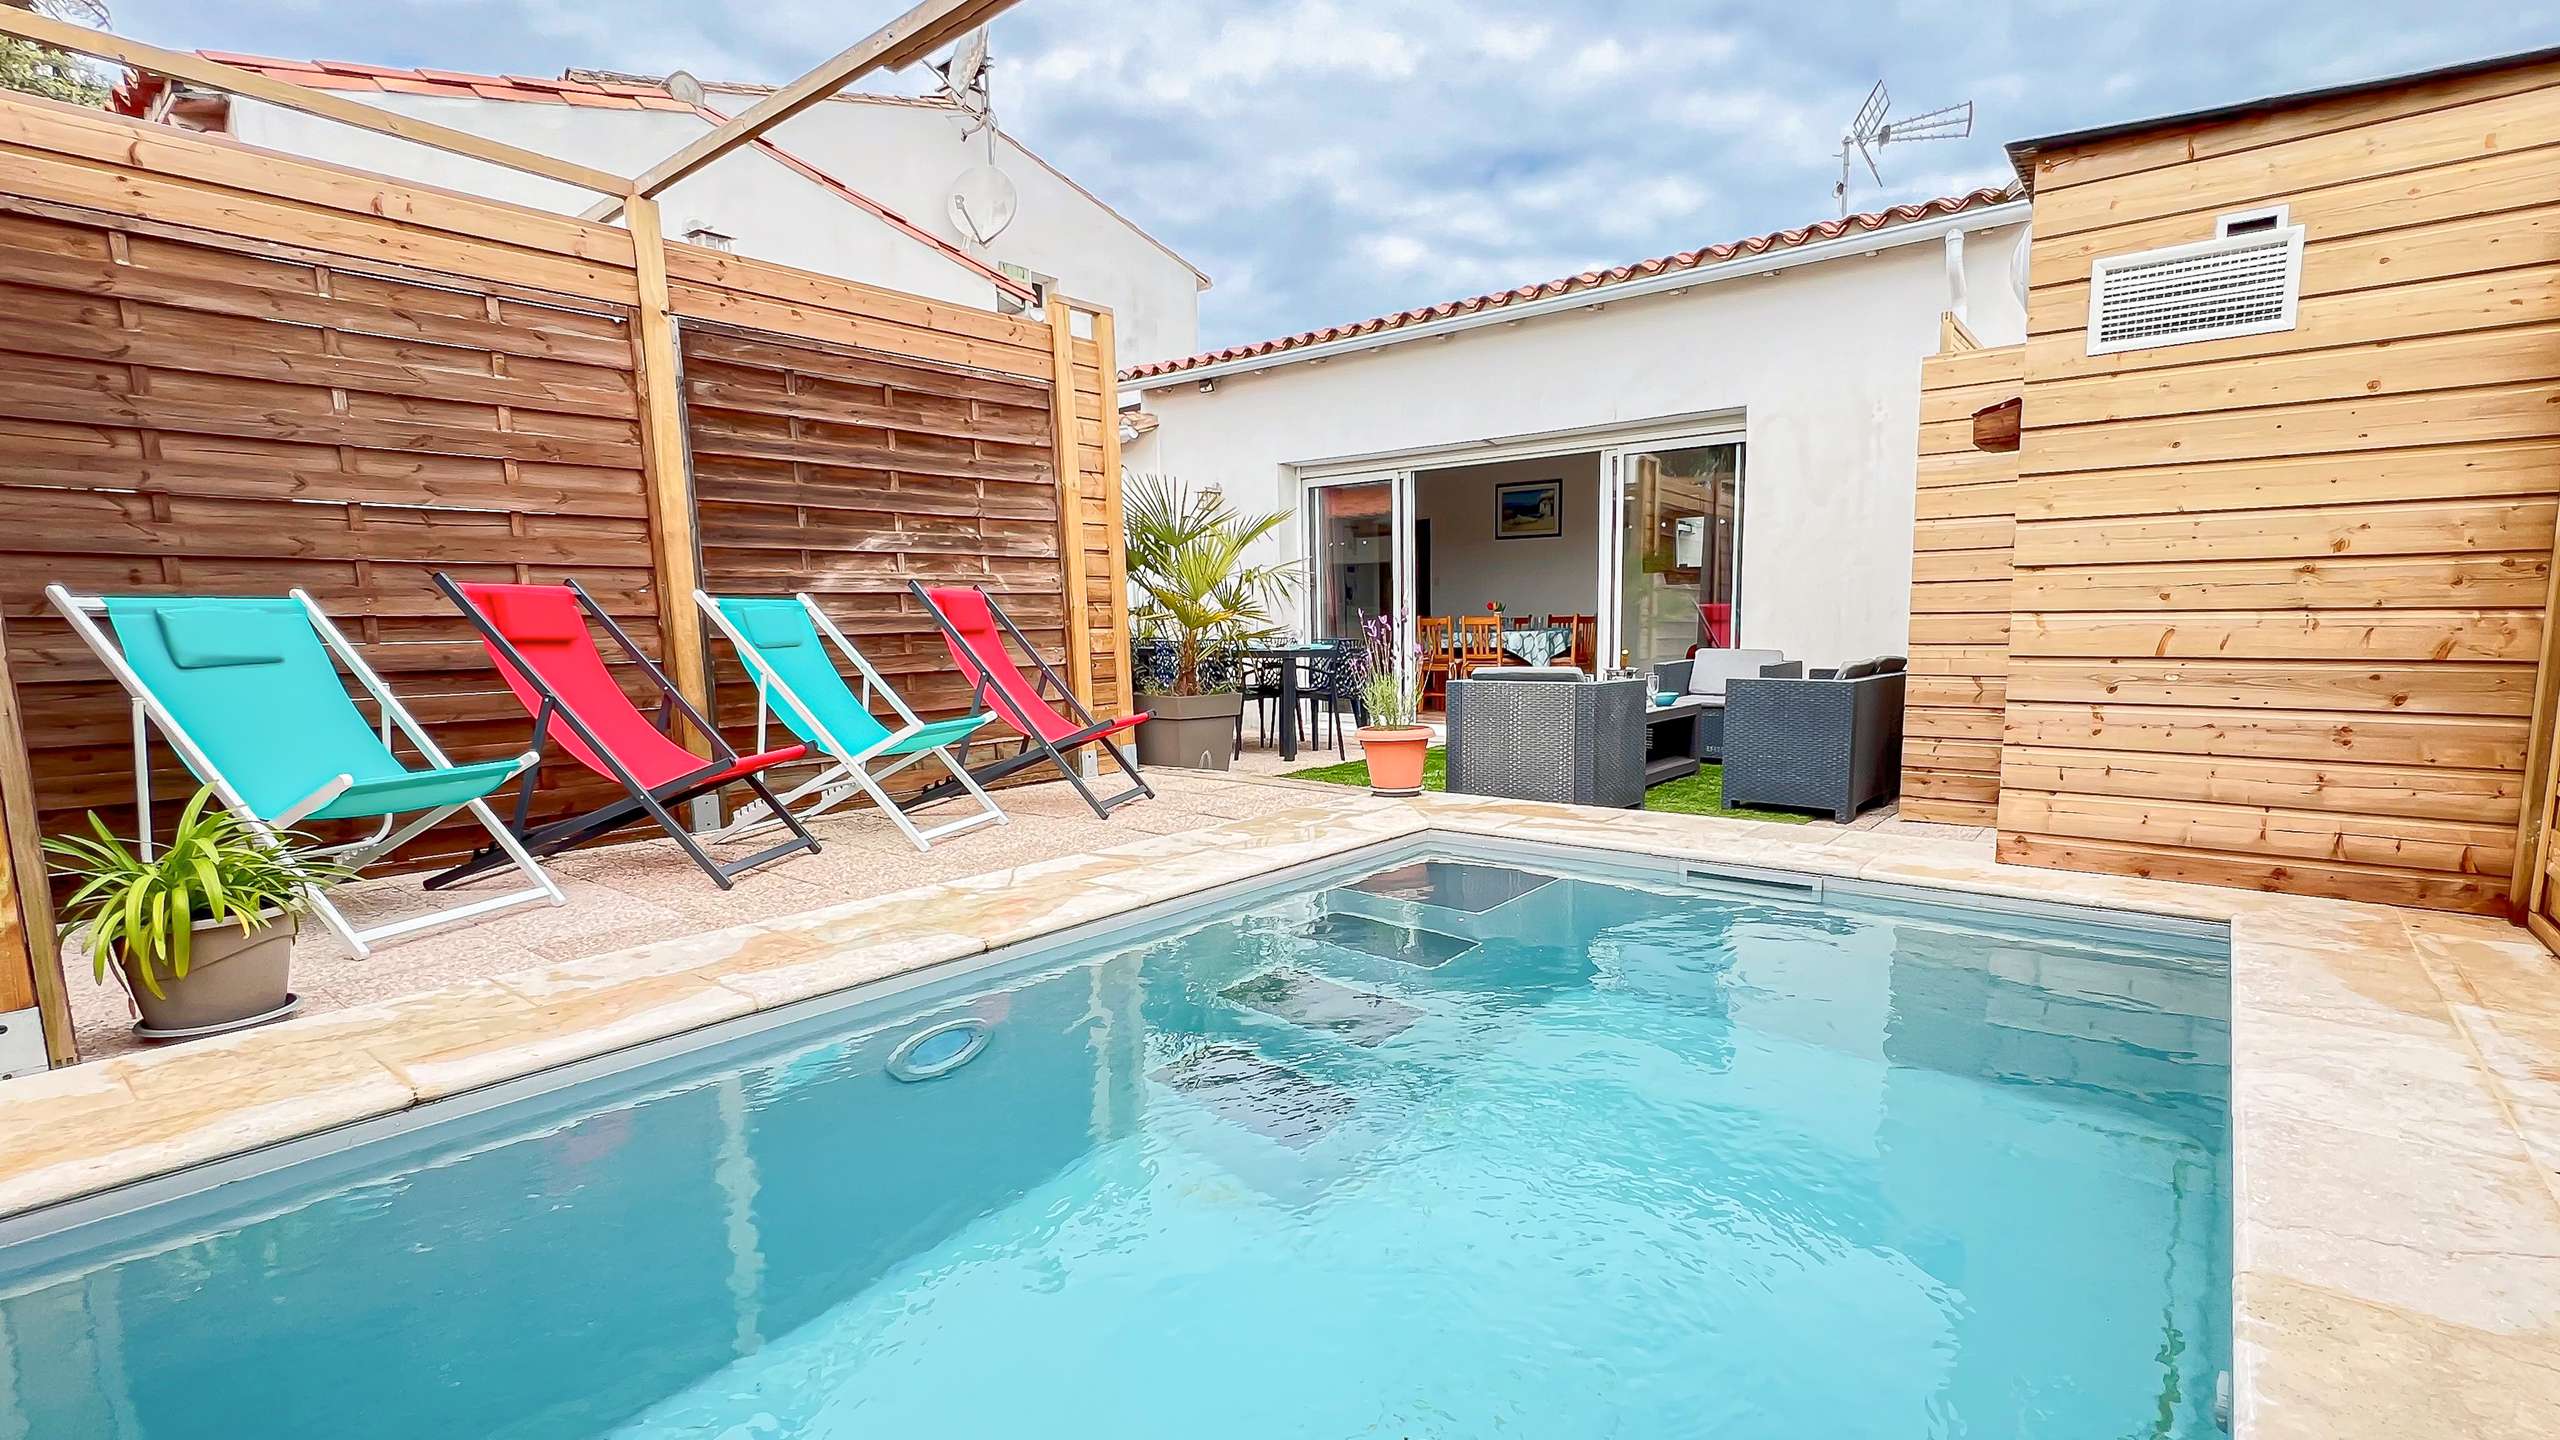 Photo 1: An accomodation located in Rivedoux-Plage on ile de Ré.